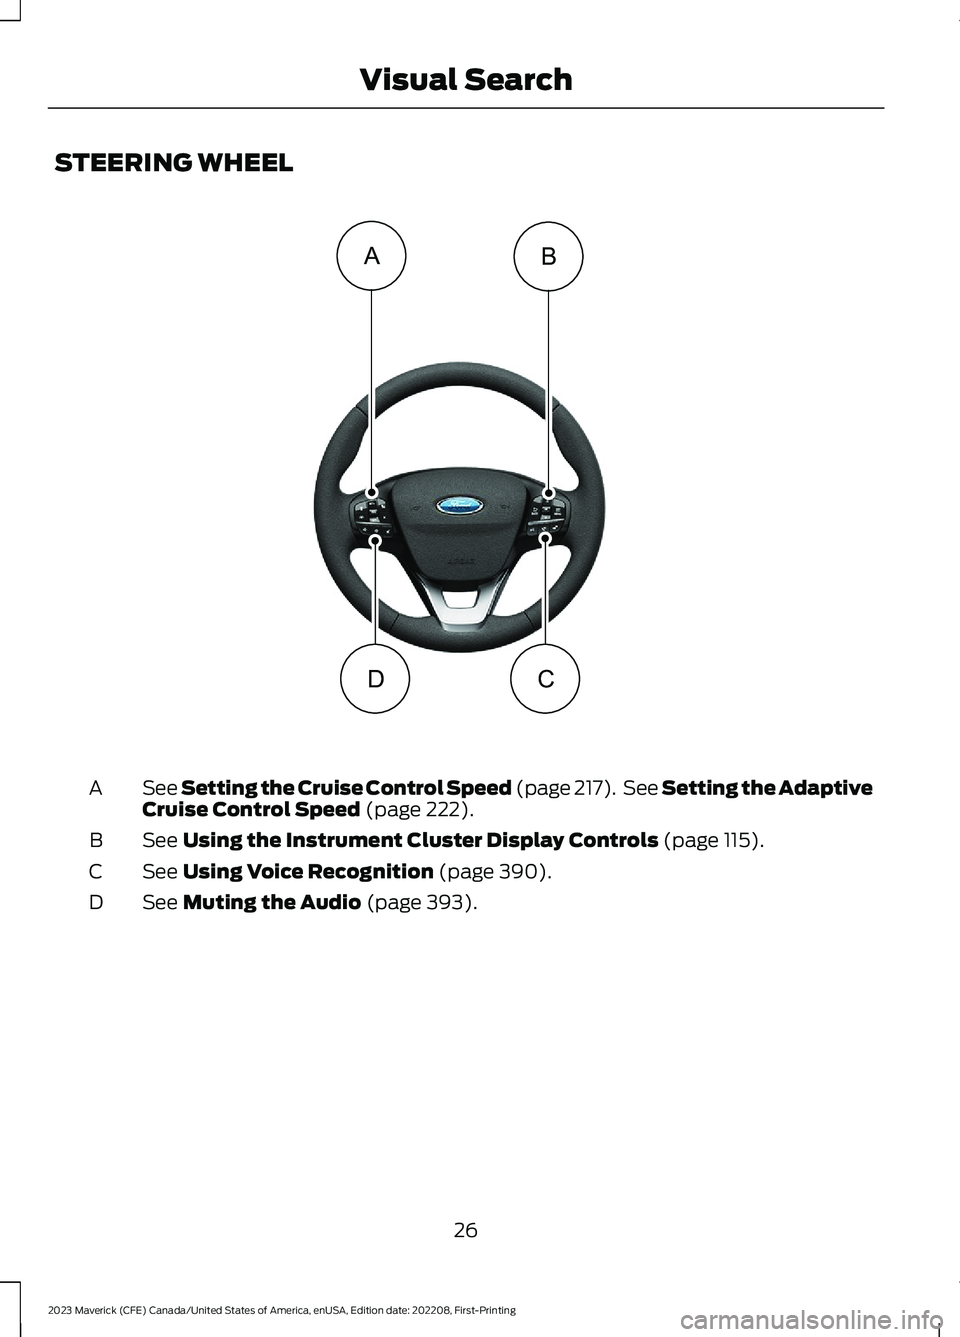 FORD MAVERICK 2023  Owners Manual STEERING WHEEL
See Setting the Cruise Control Speed (page 217). See Setting the AdaptiveCruise Control Speed (page 222).A
See Using the Instrument Cluster Display Controls (page 115).B
See Using Voice